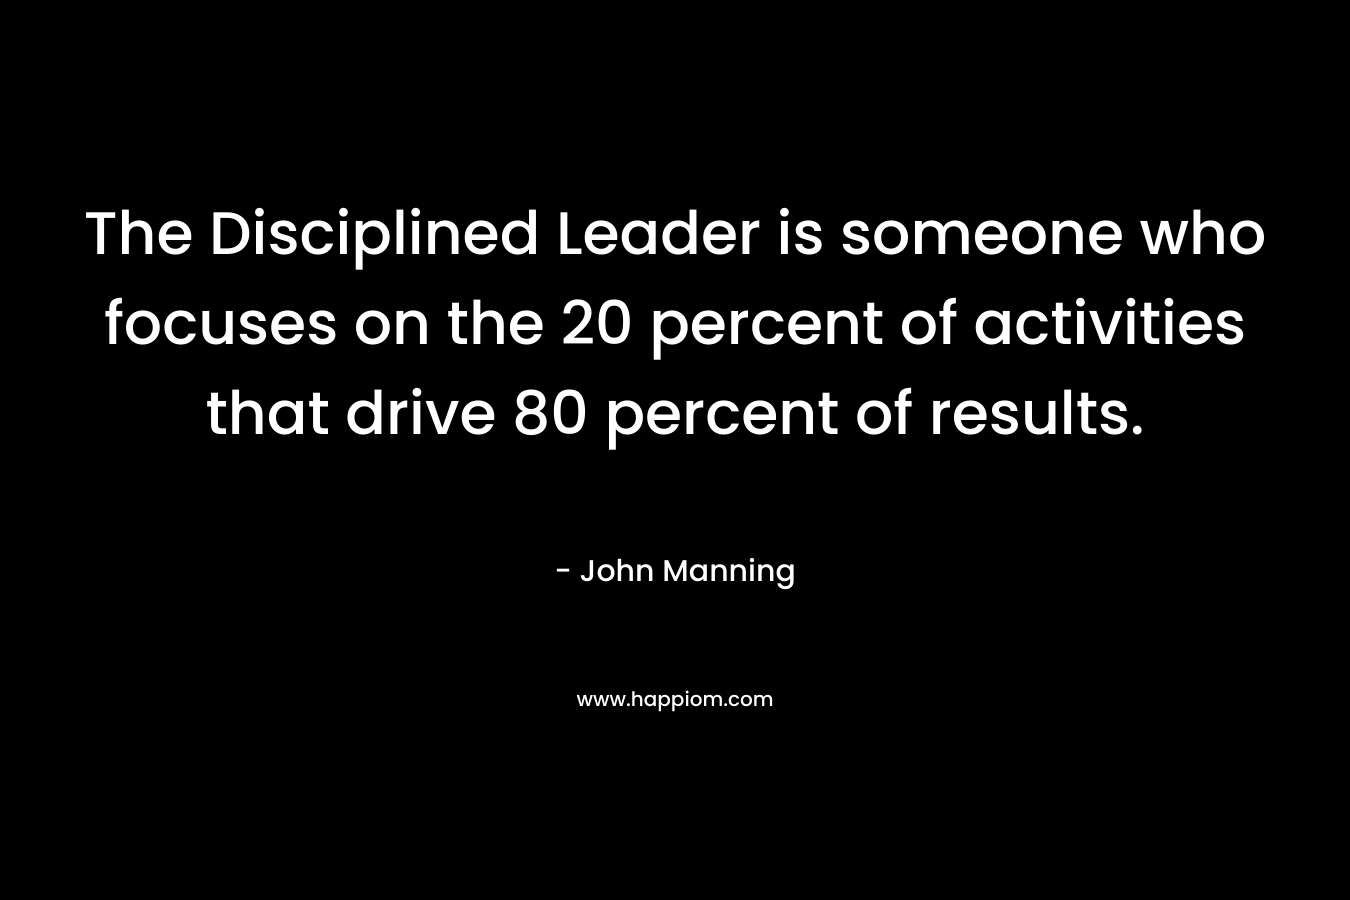 The Disciplined Leader is someone who focuses on the 20 percent of activities that drive 80 percent of results.